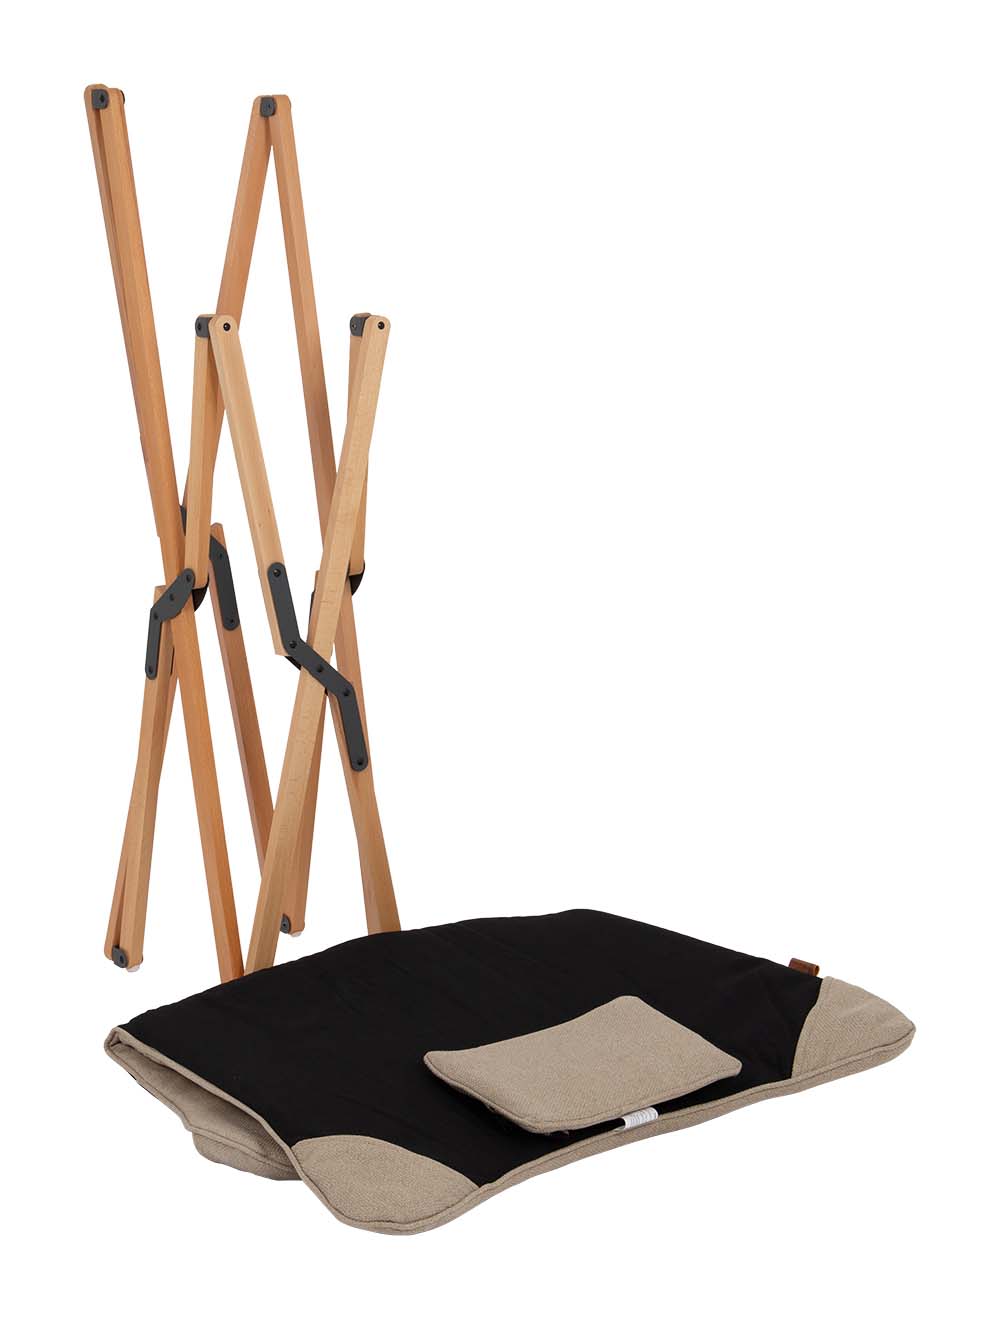 Bo-Camp - Urban Outdoor collection - Relax chair - Wembley - L - Nika - Beige detail 9